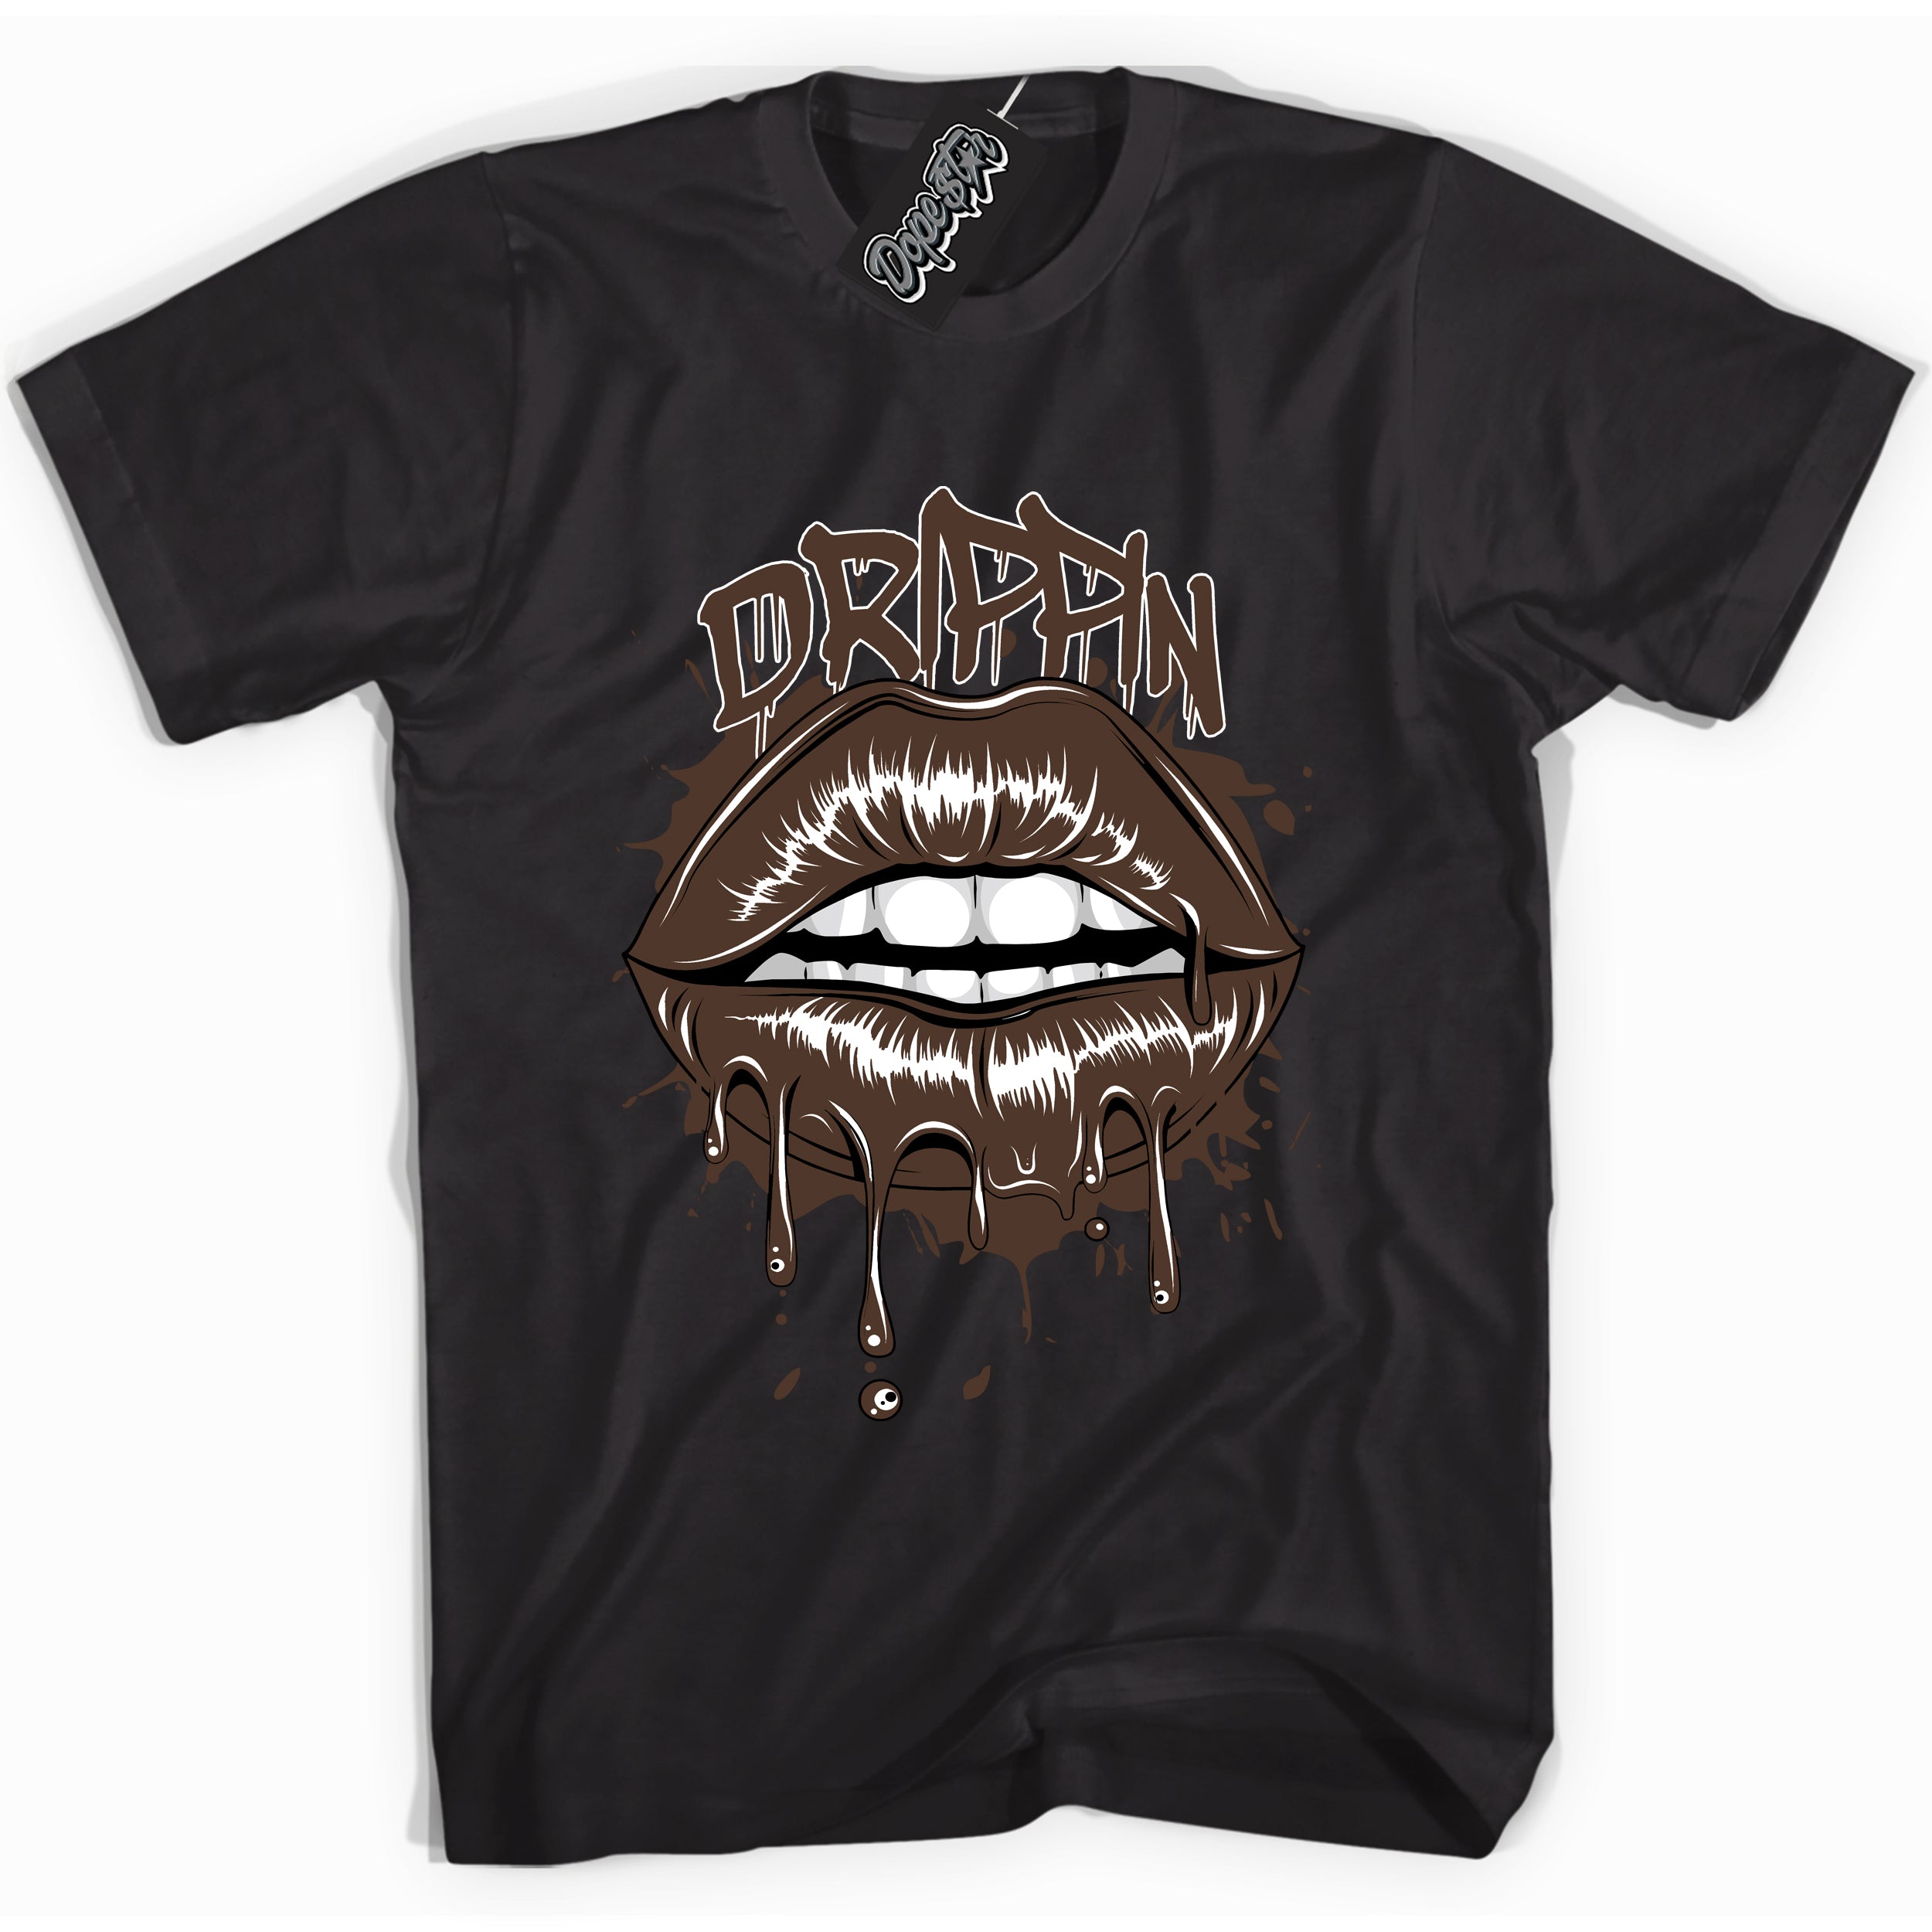 Cool Black graphic tee with “ Drippin ” design, that perfectly matches Palomino 1s sneakers 